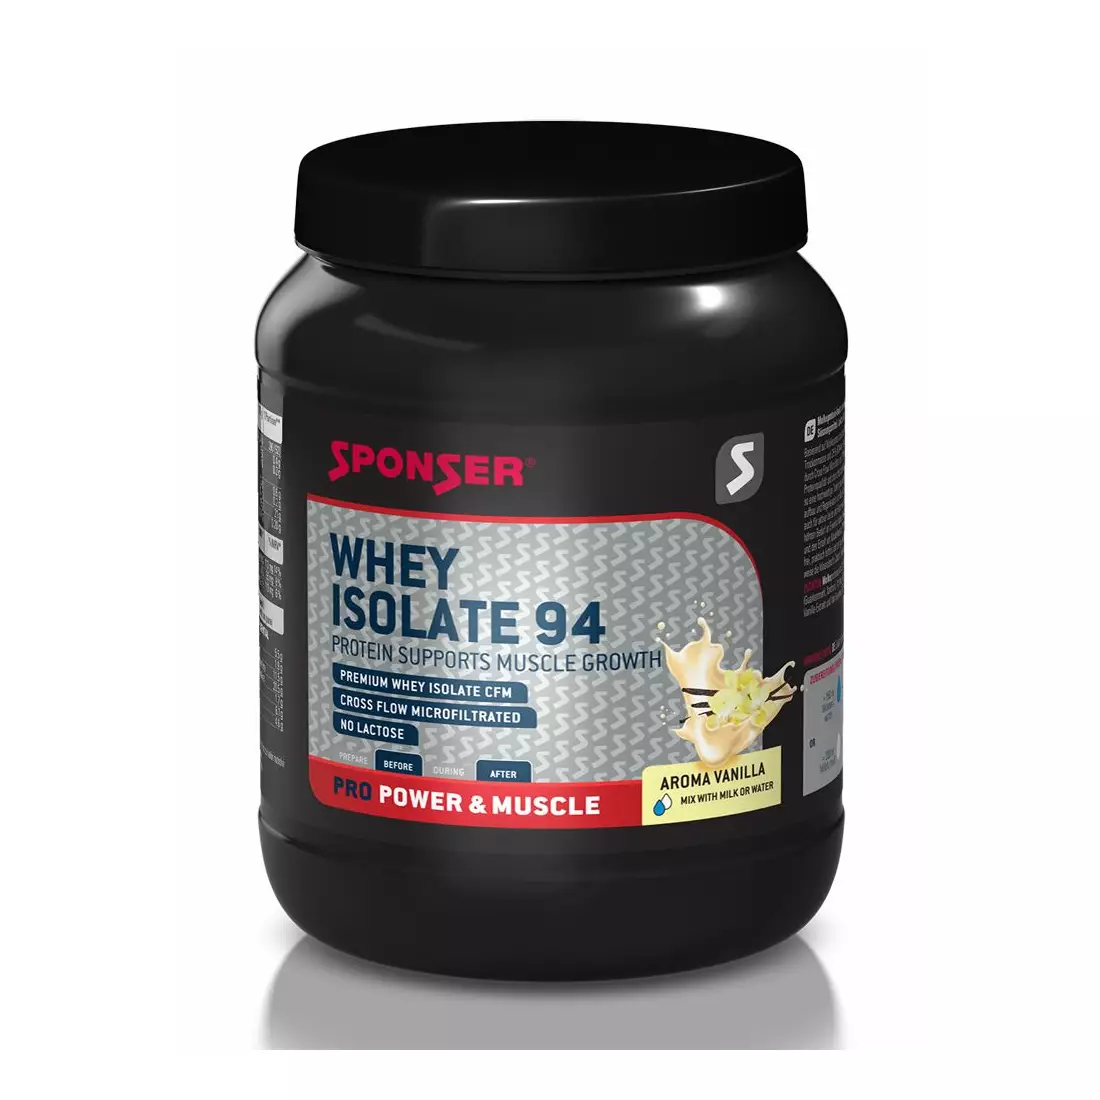 SPONSER WHEY ISOLATE 94 Vanille Conditioner 1500g Dose